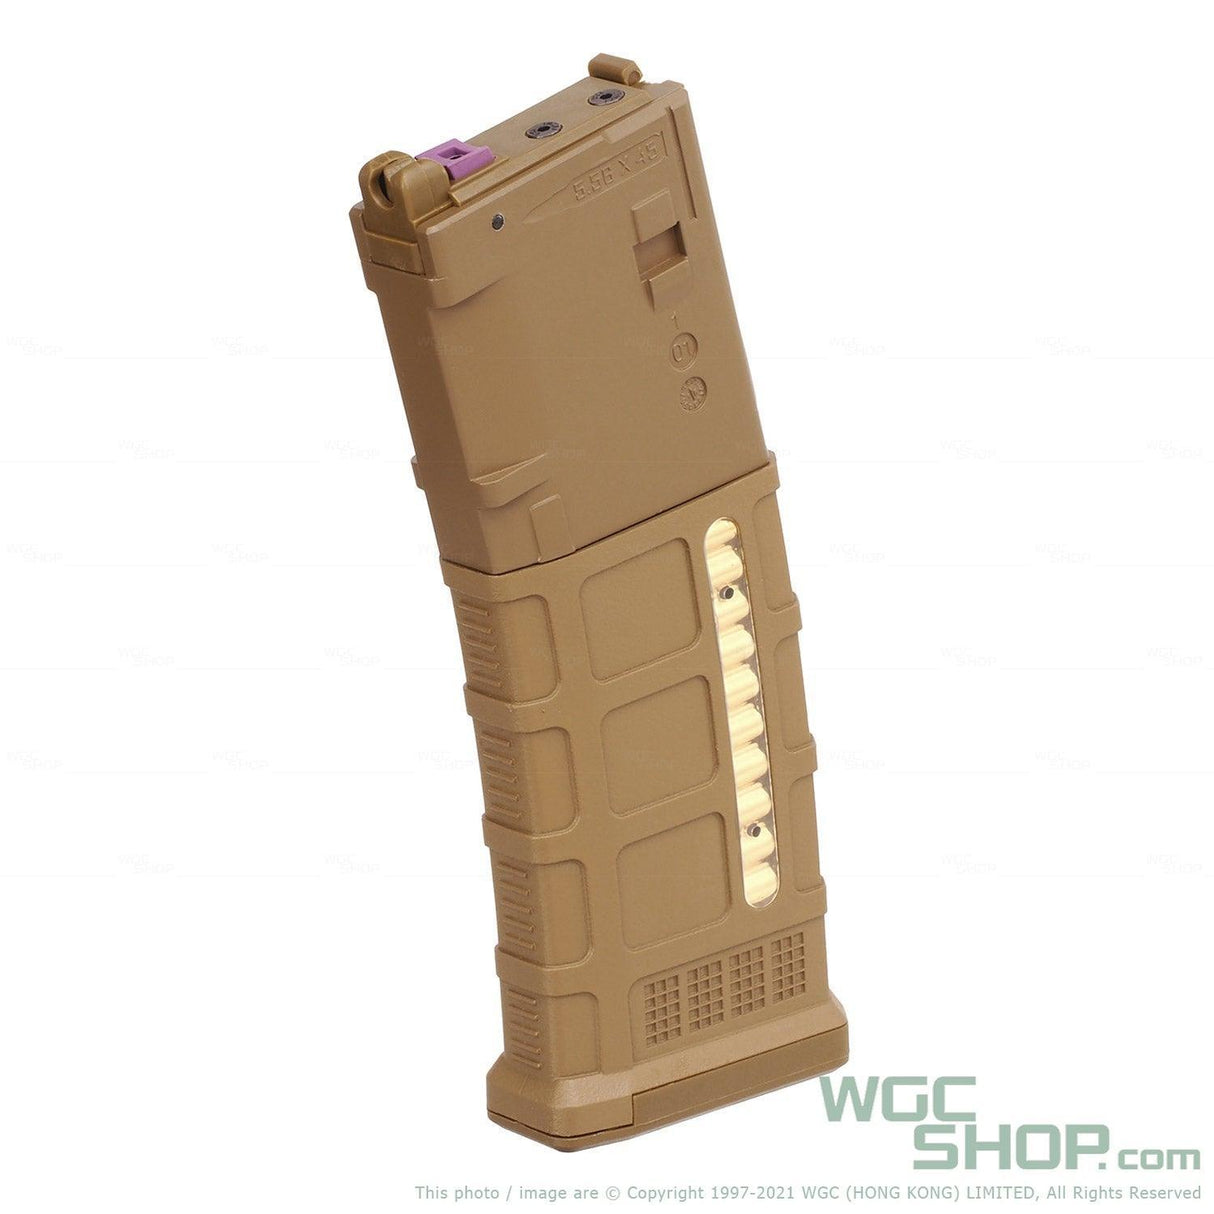 T8 P30 Gas Magazine with Window for Marui MWS GBB Airsoft - WGC Shop